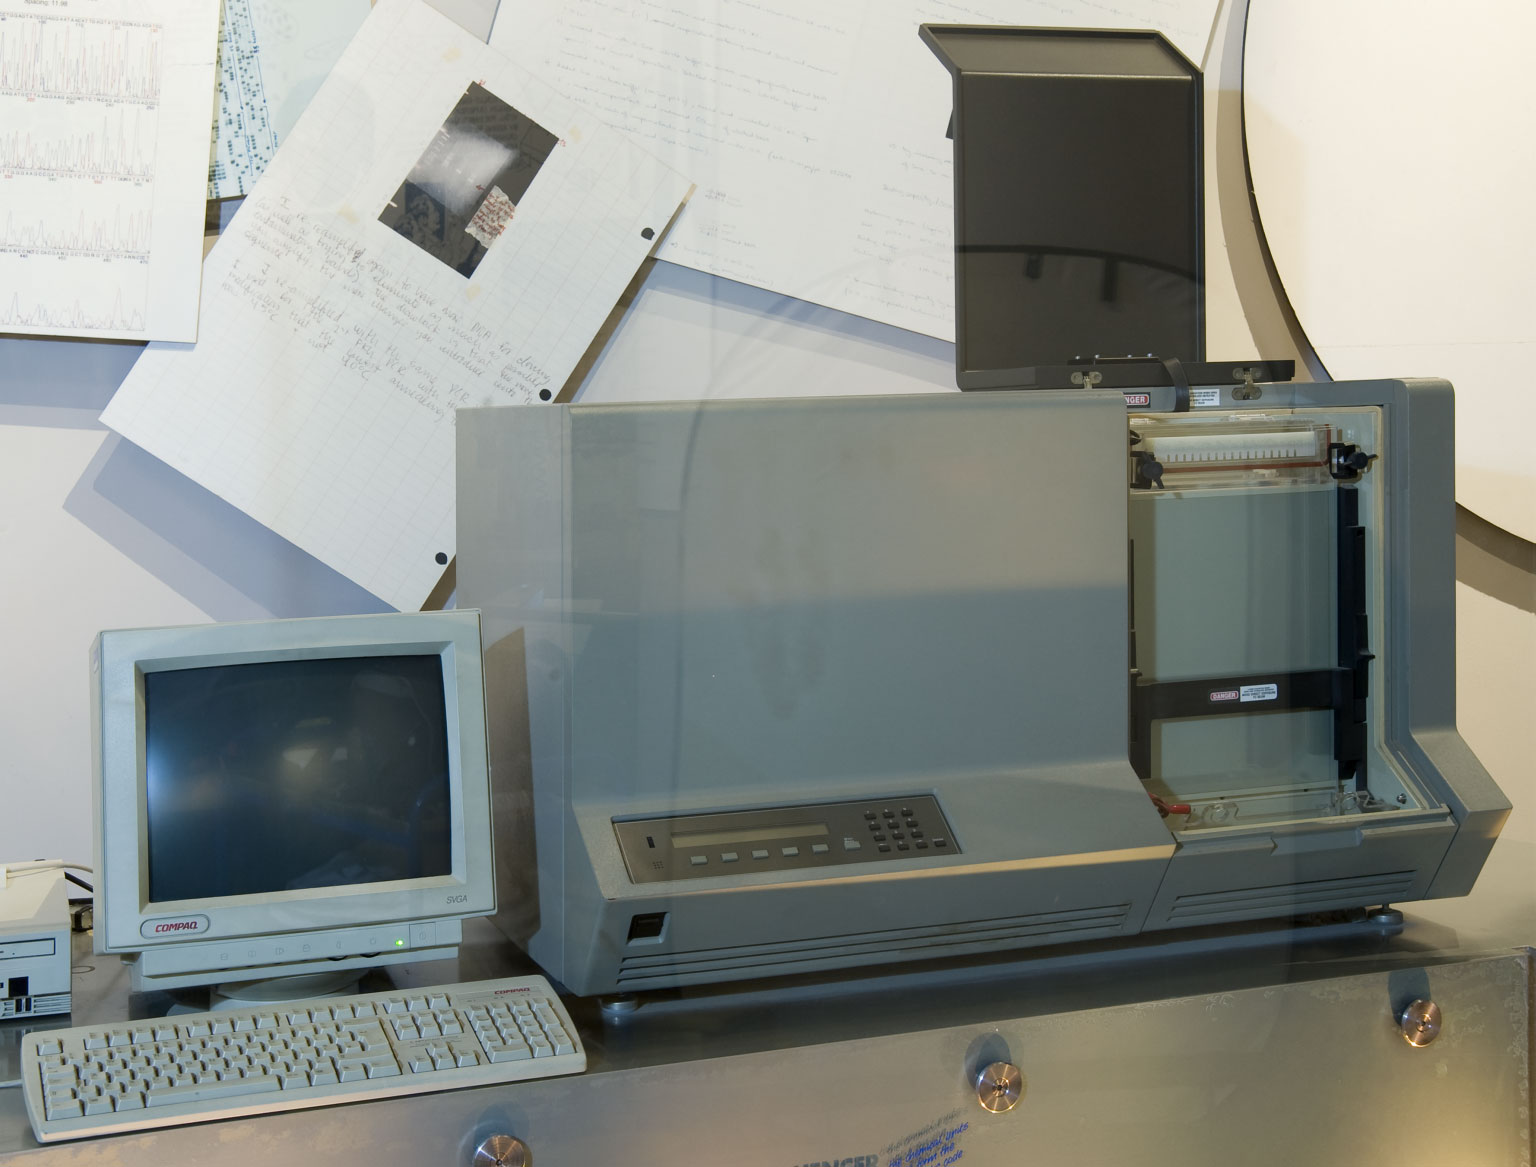 This machine, developed in 1987, uses the Sanger method for DNA sequencing. Credit: Science Museum